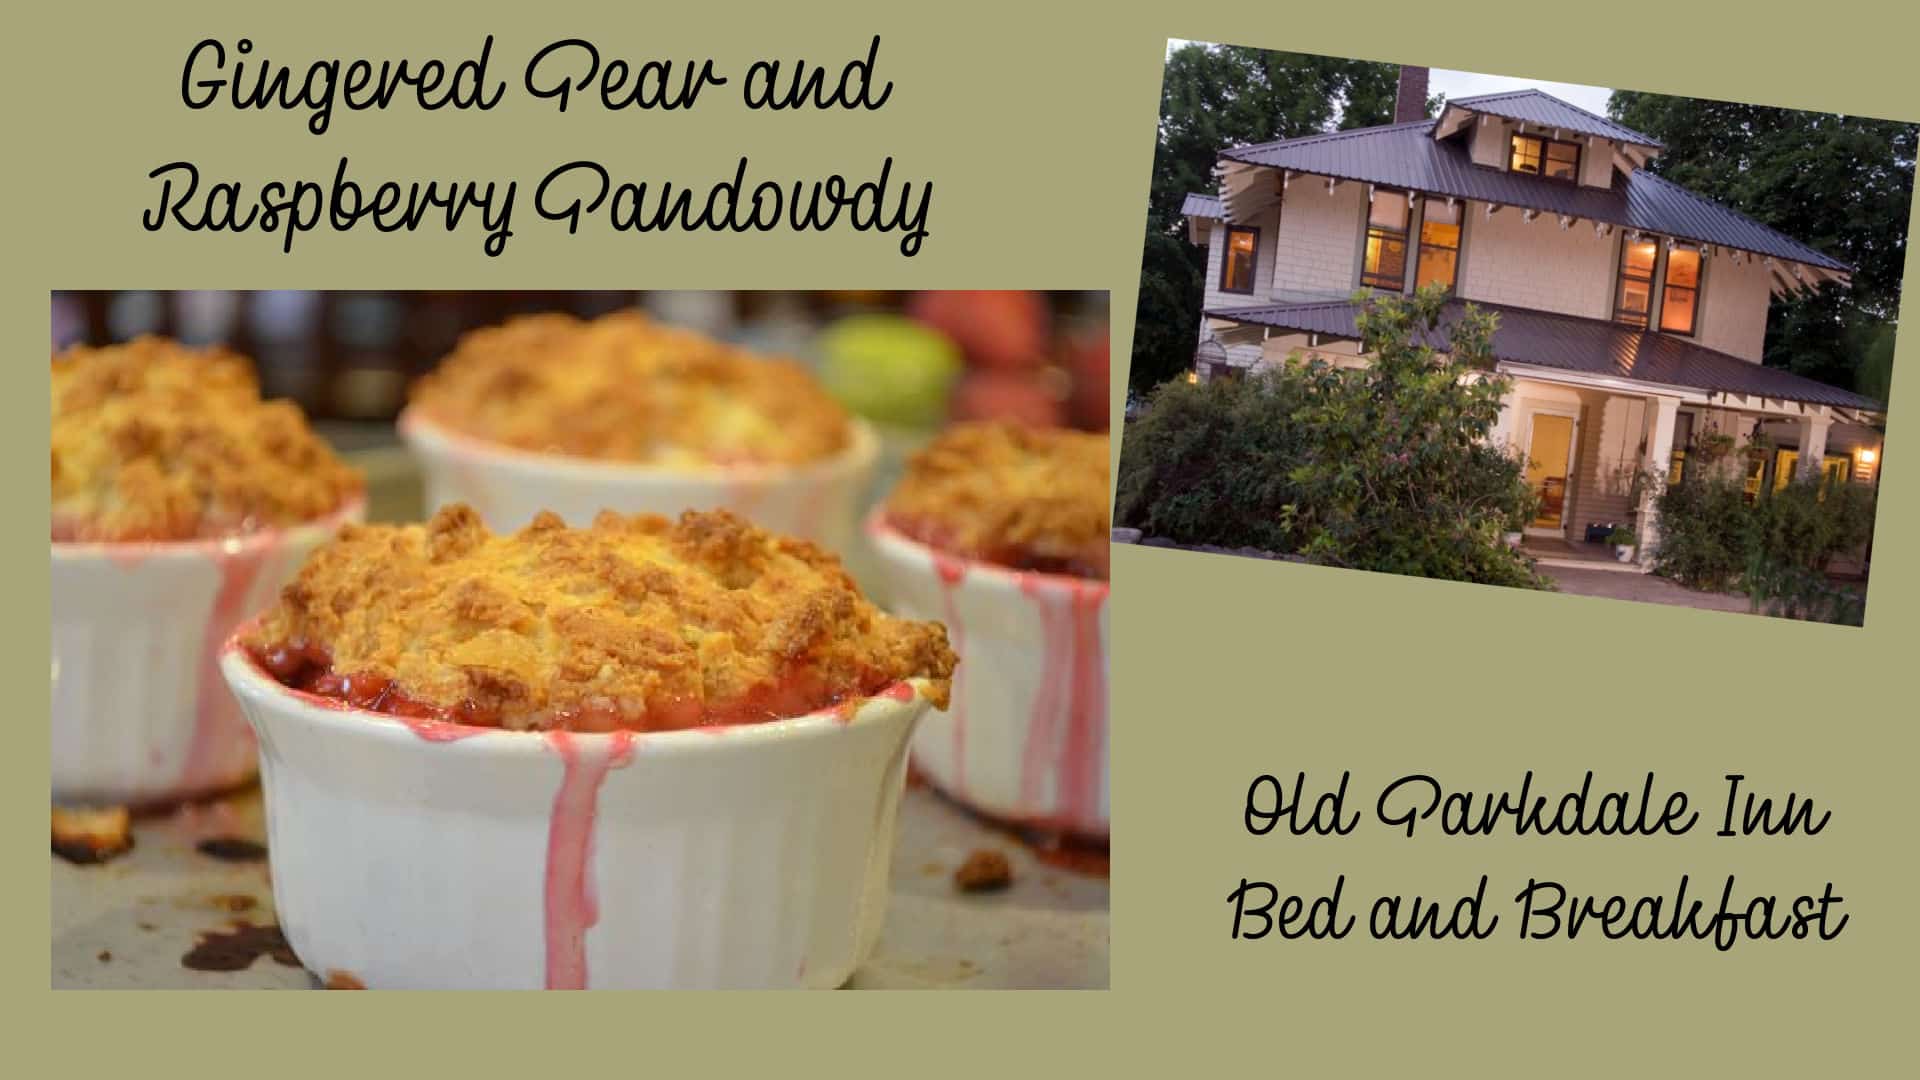 Gingered Pear Raspberry Pandowdy banner with image of the Old Parkdale Inn